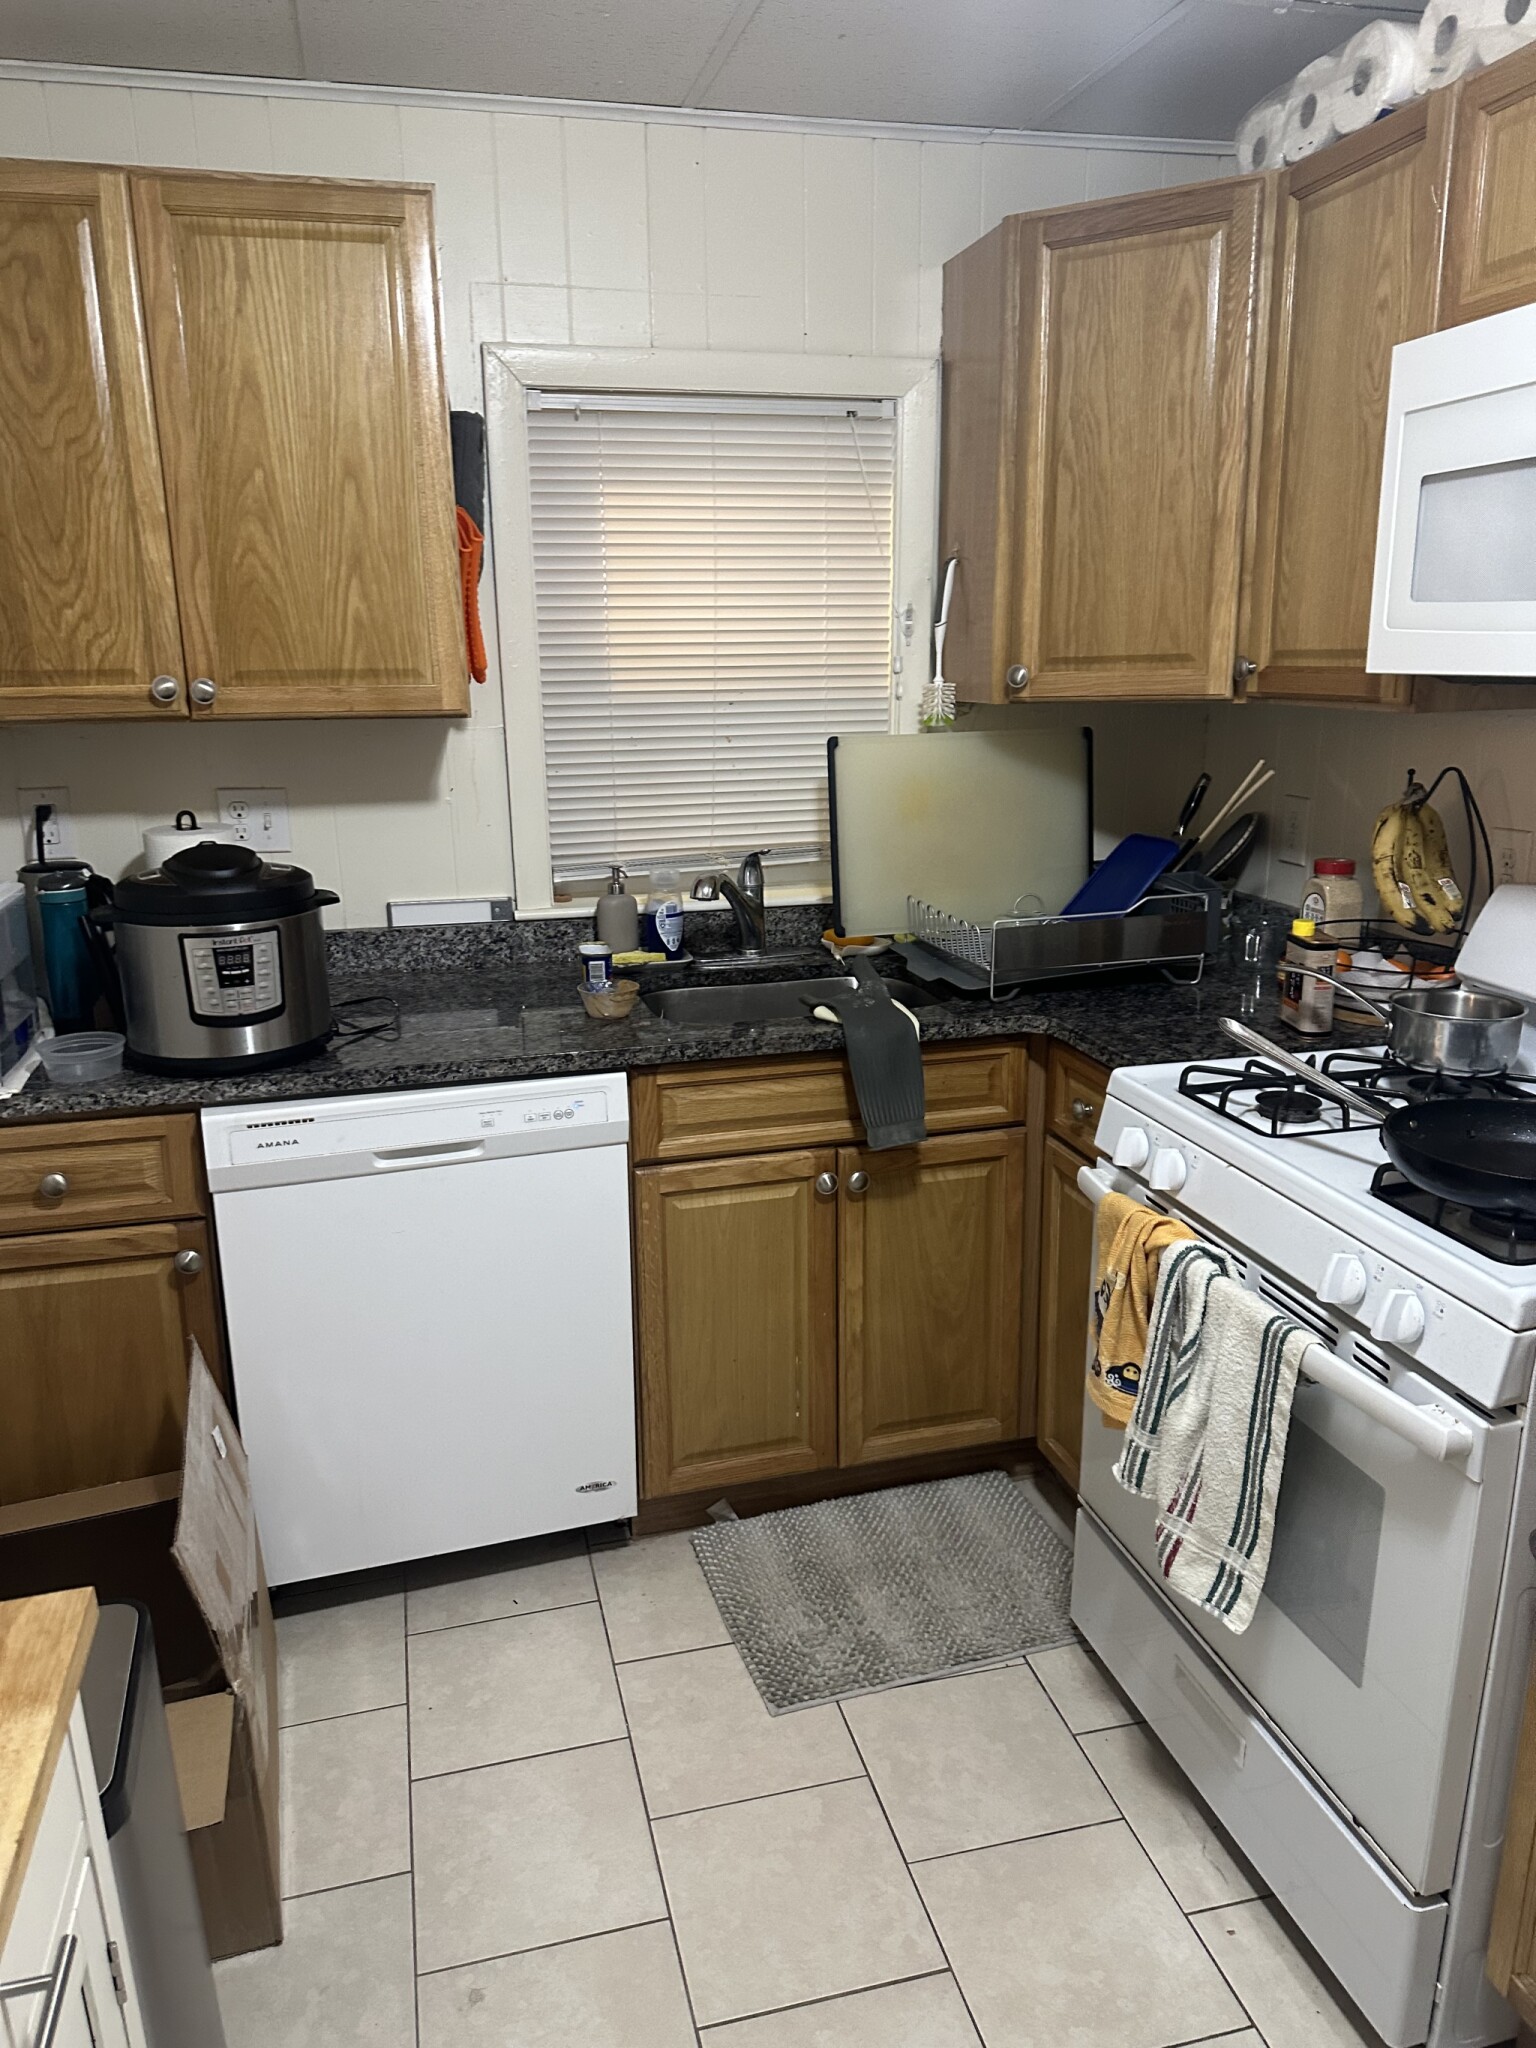 Photos of apartment on Concord Turnpike,Cambridge MA 02140